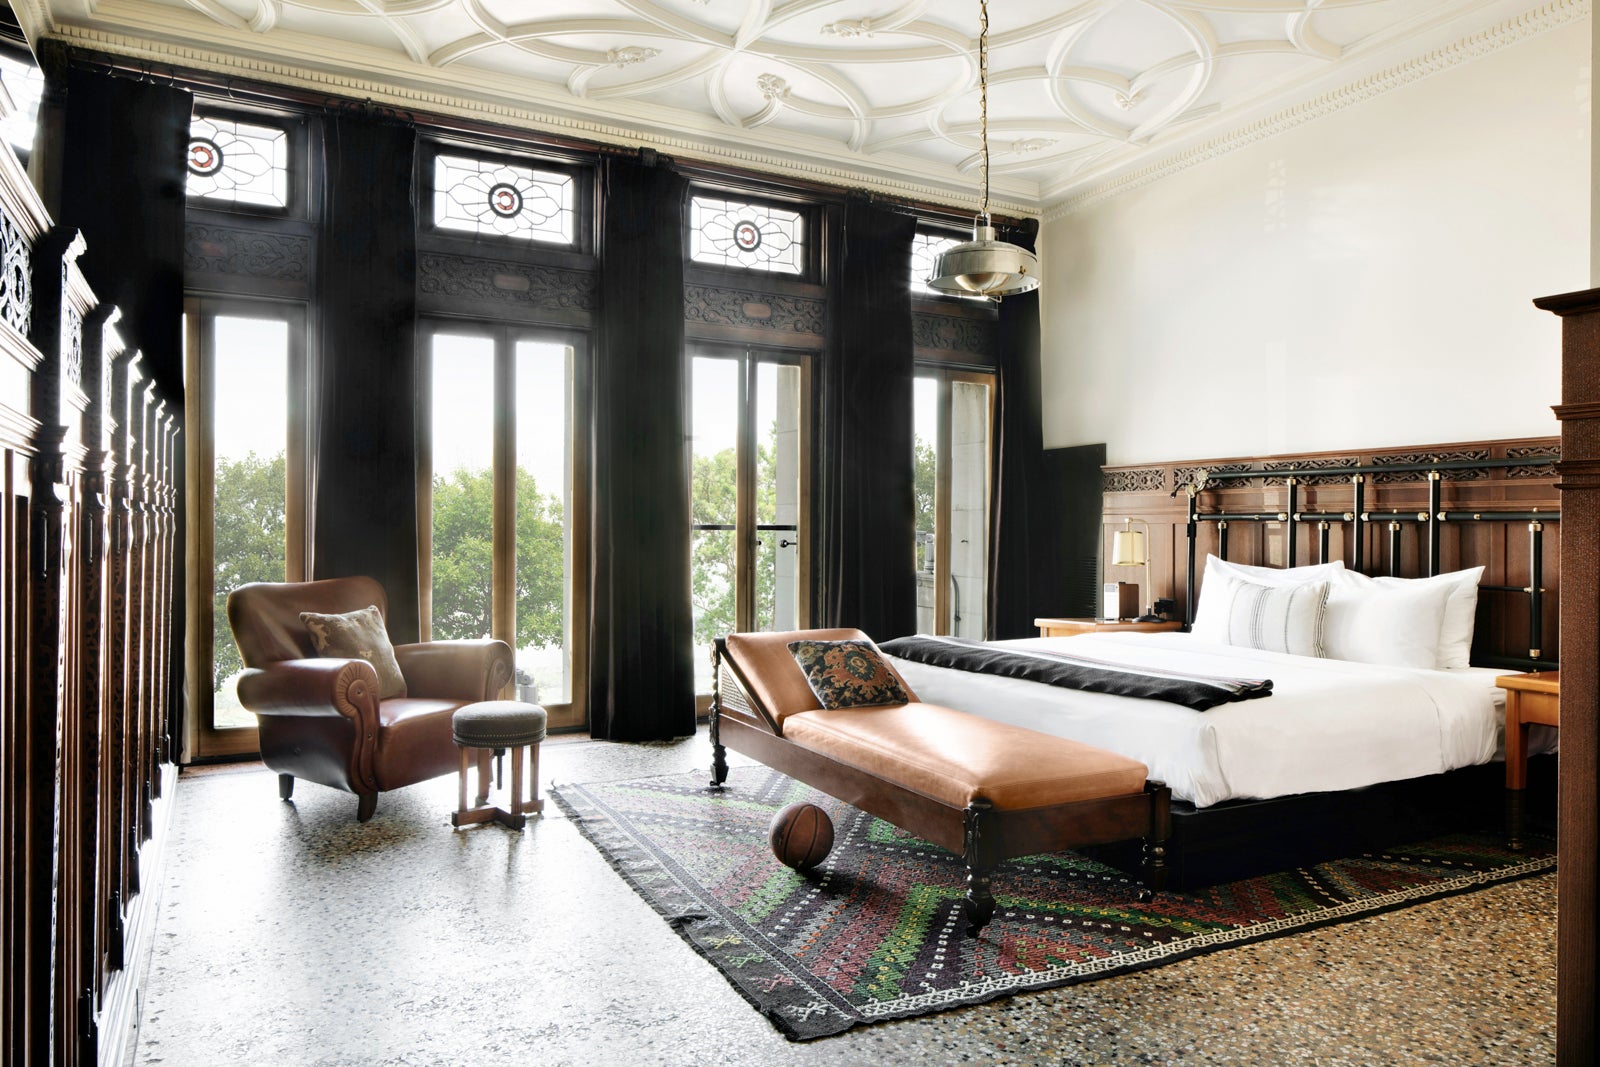 Chicago Athletic Association guest room